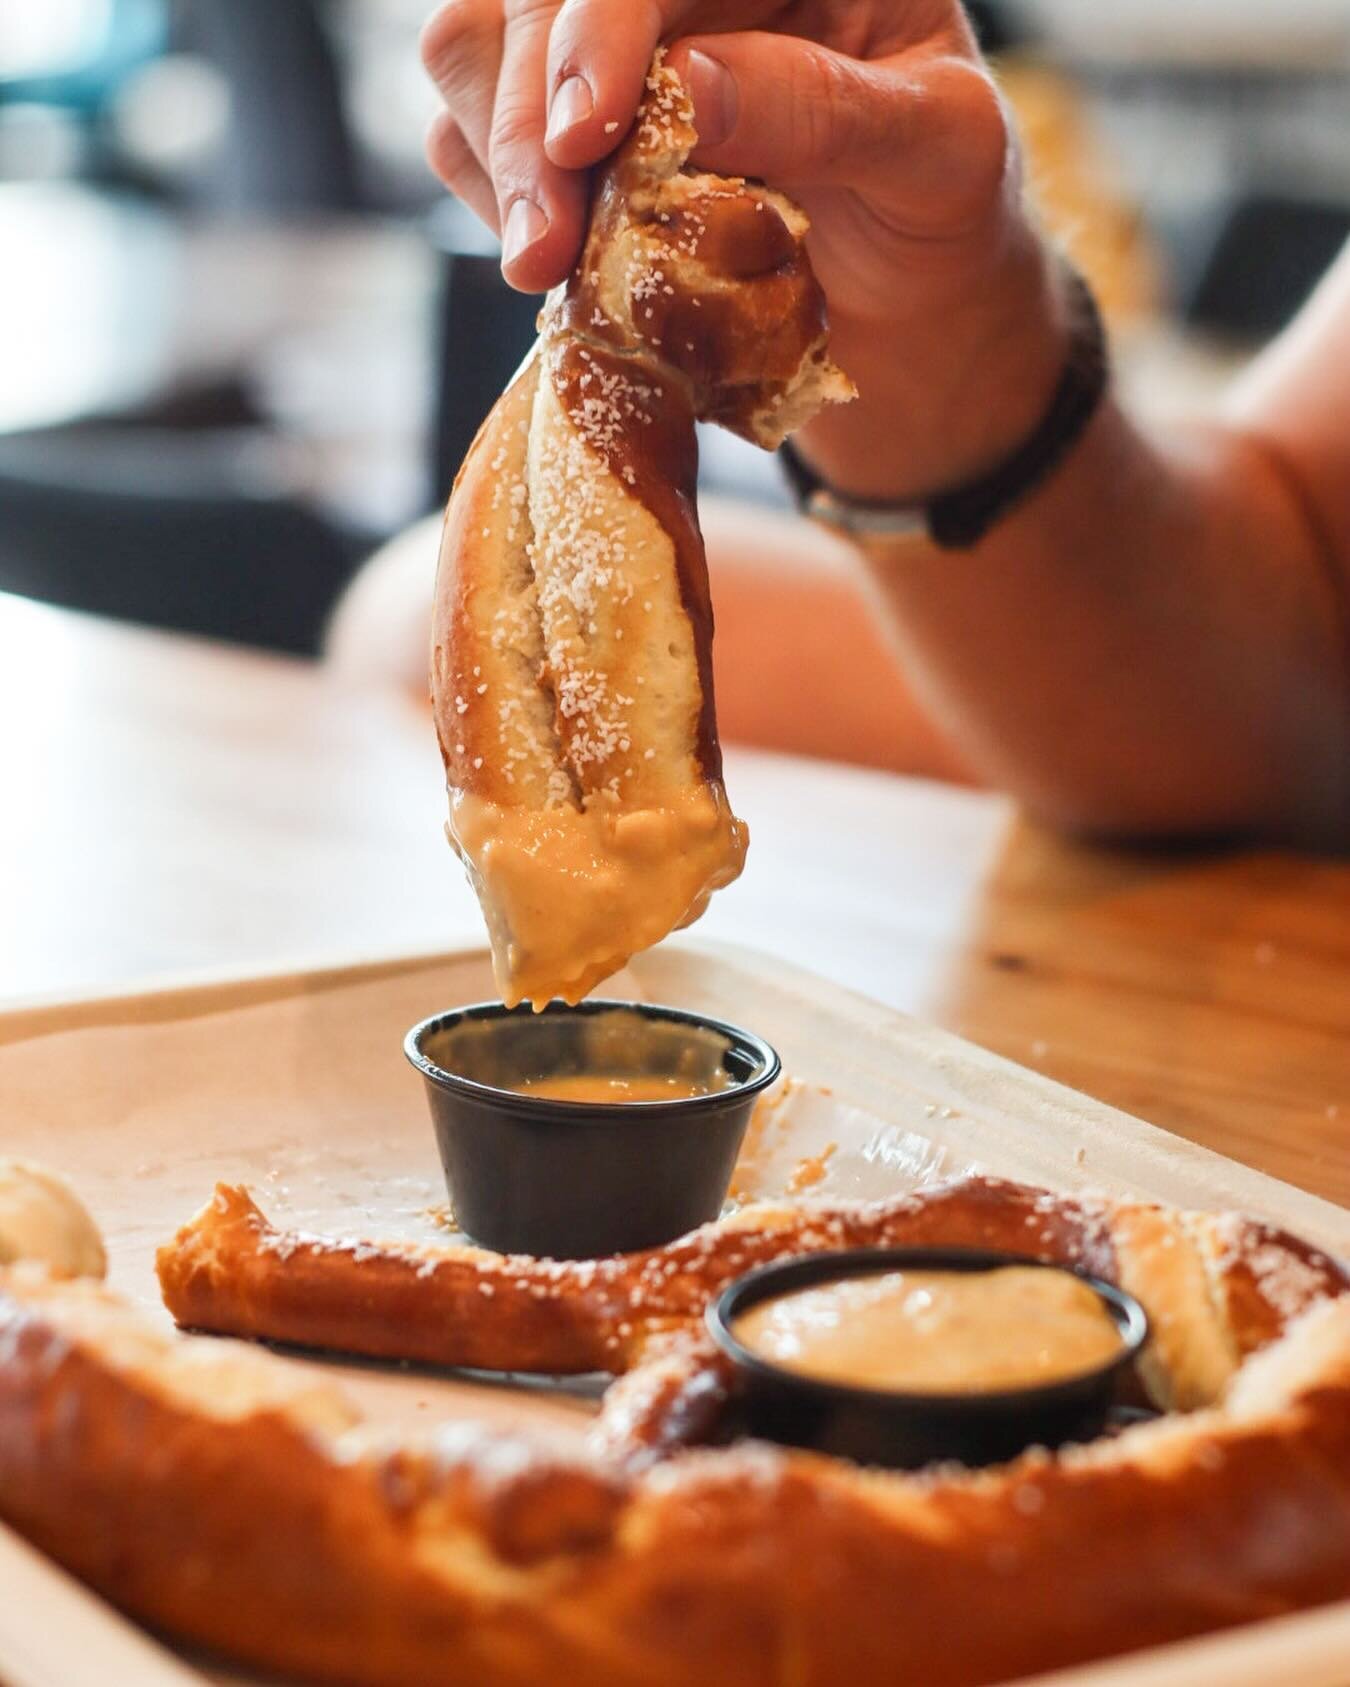 Come crush this jumbo pretzel with our yummy homemade beer cheese 👌

Happening this week ⬇️

TONIGHT 🐉
Dungeons &amp; Dragons at 7PM

TOMORROW🧠
General Knowledge Trivia at 7PM

THURSDAY🎤
Jukebox Bingo at 7PM

SATURDAY🍺
Hamlin Craft Beer Fest at 